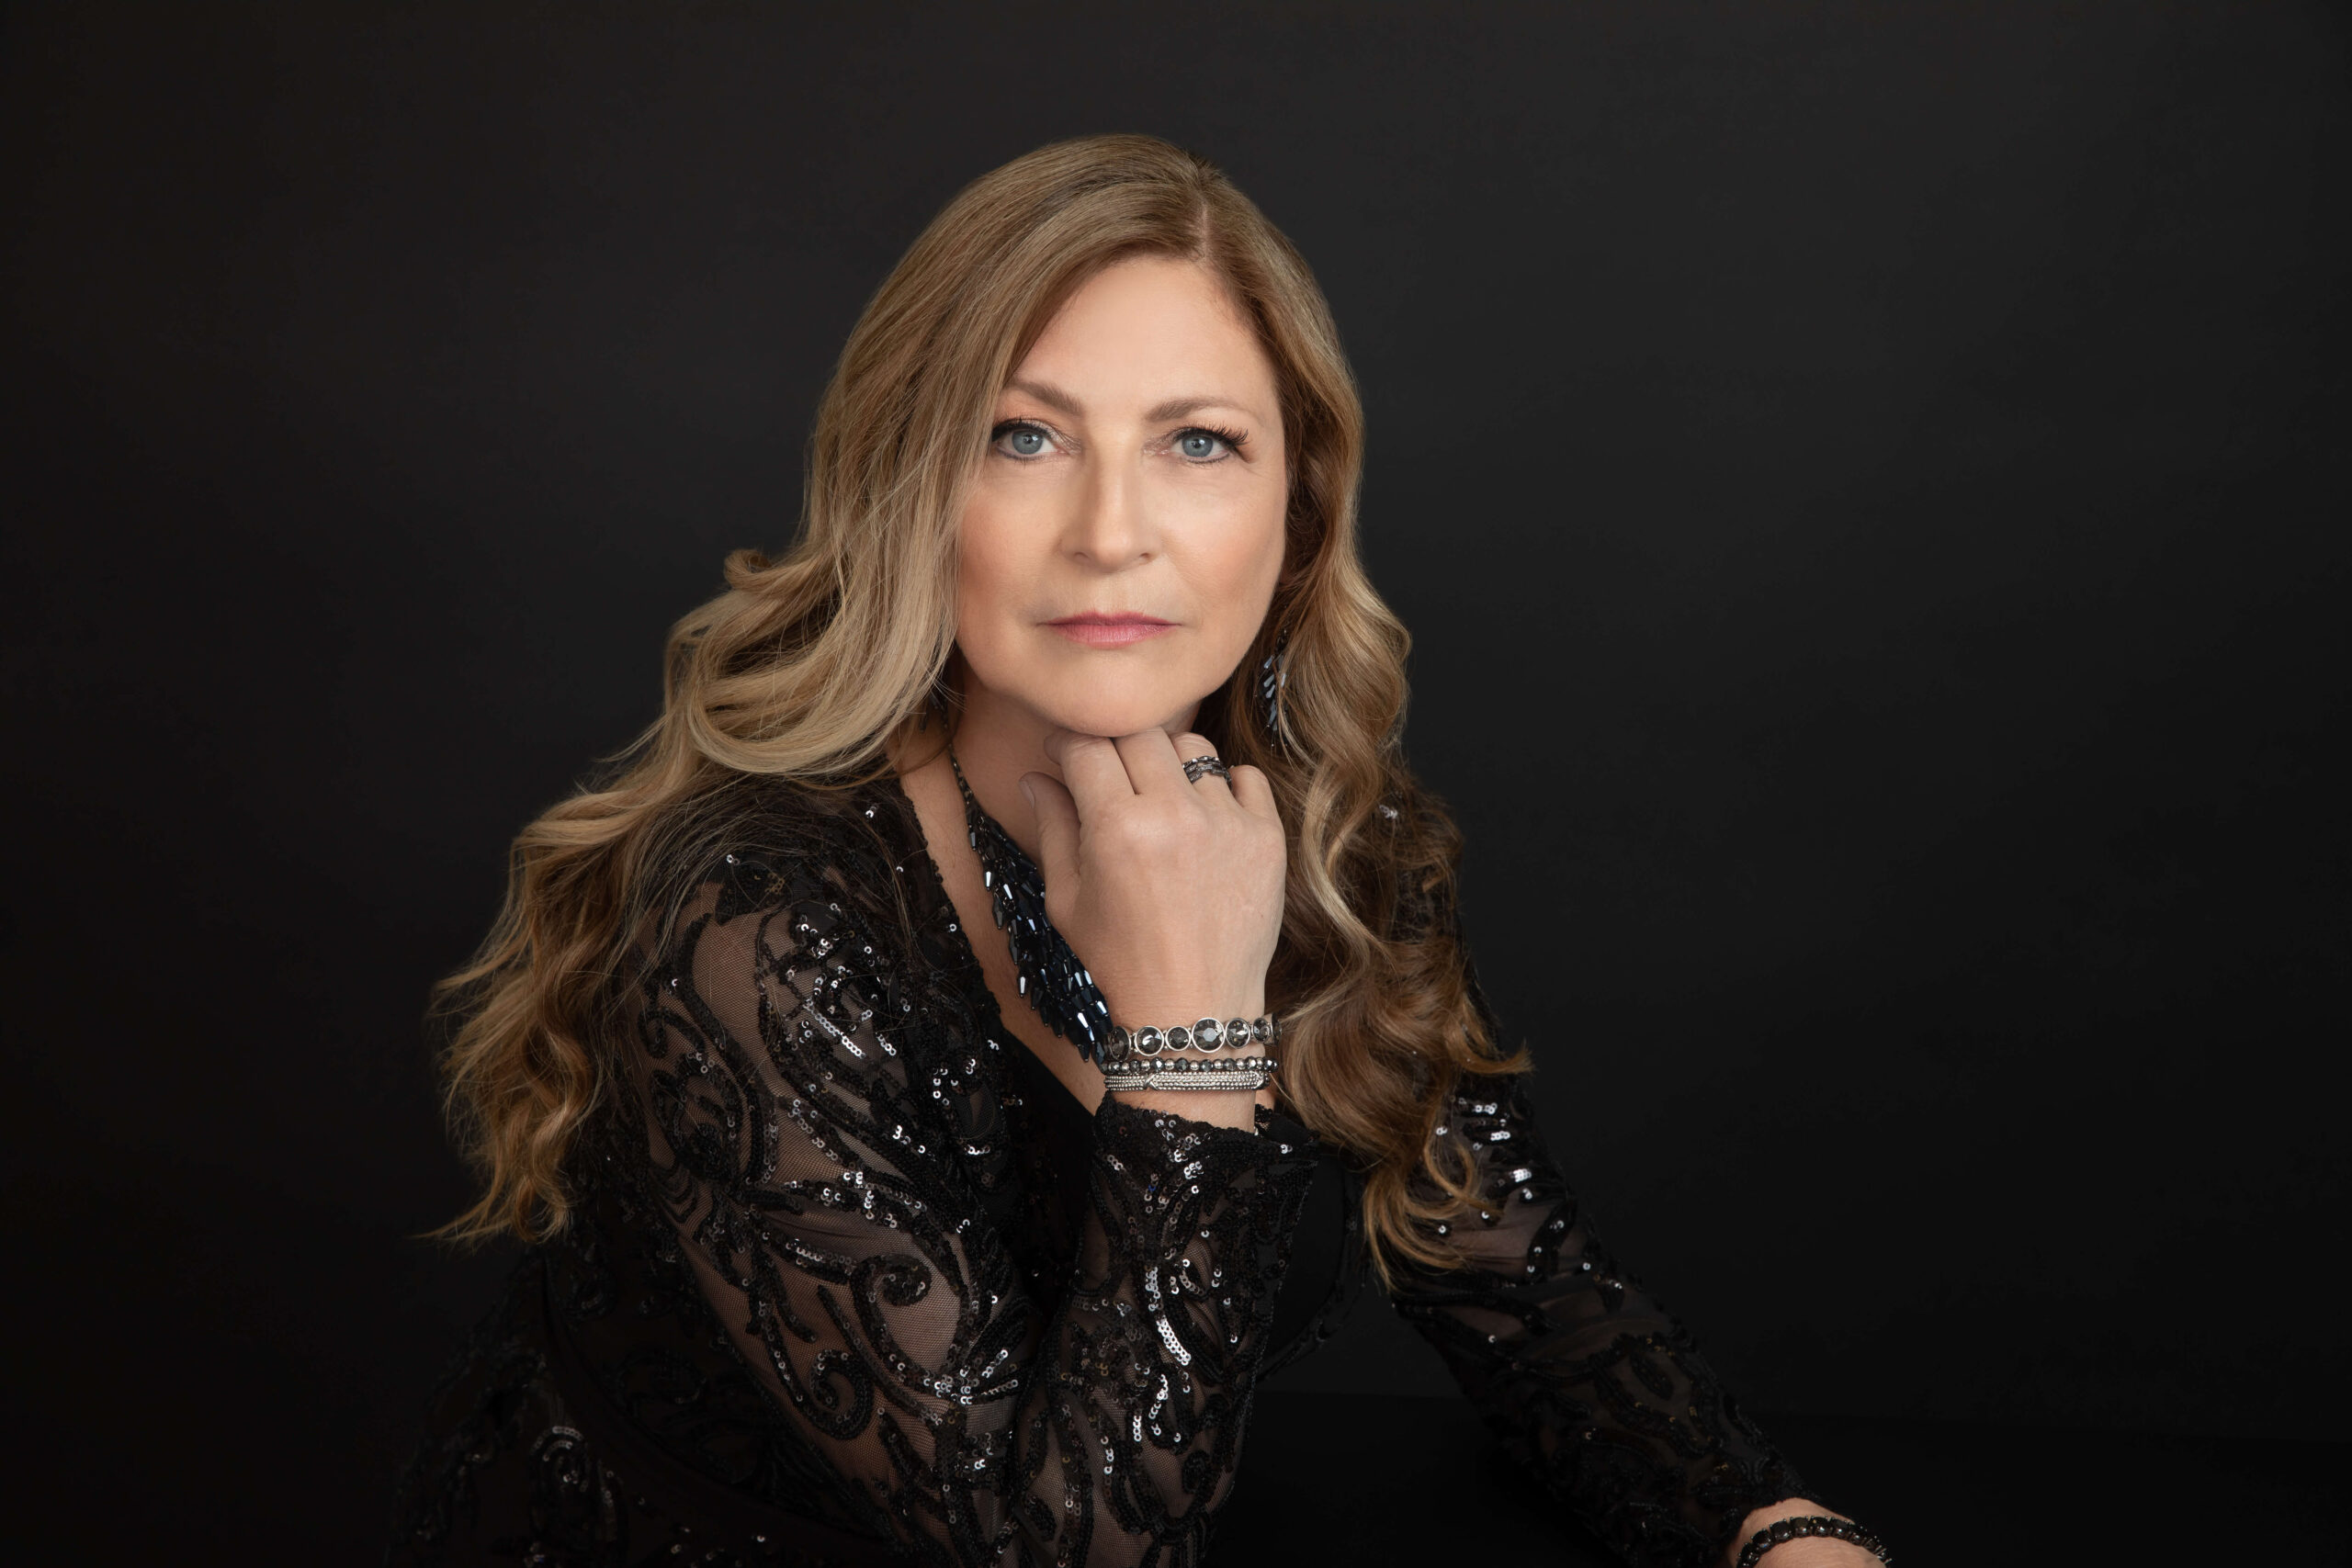 Woman with long, wavy hair wearing a black lace dress and jewelry, posing with her chin on her hand against a black background by Wenatchee Photographer Lynette